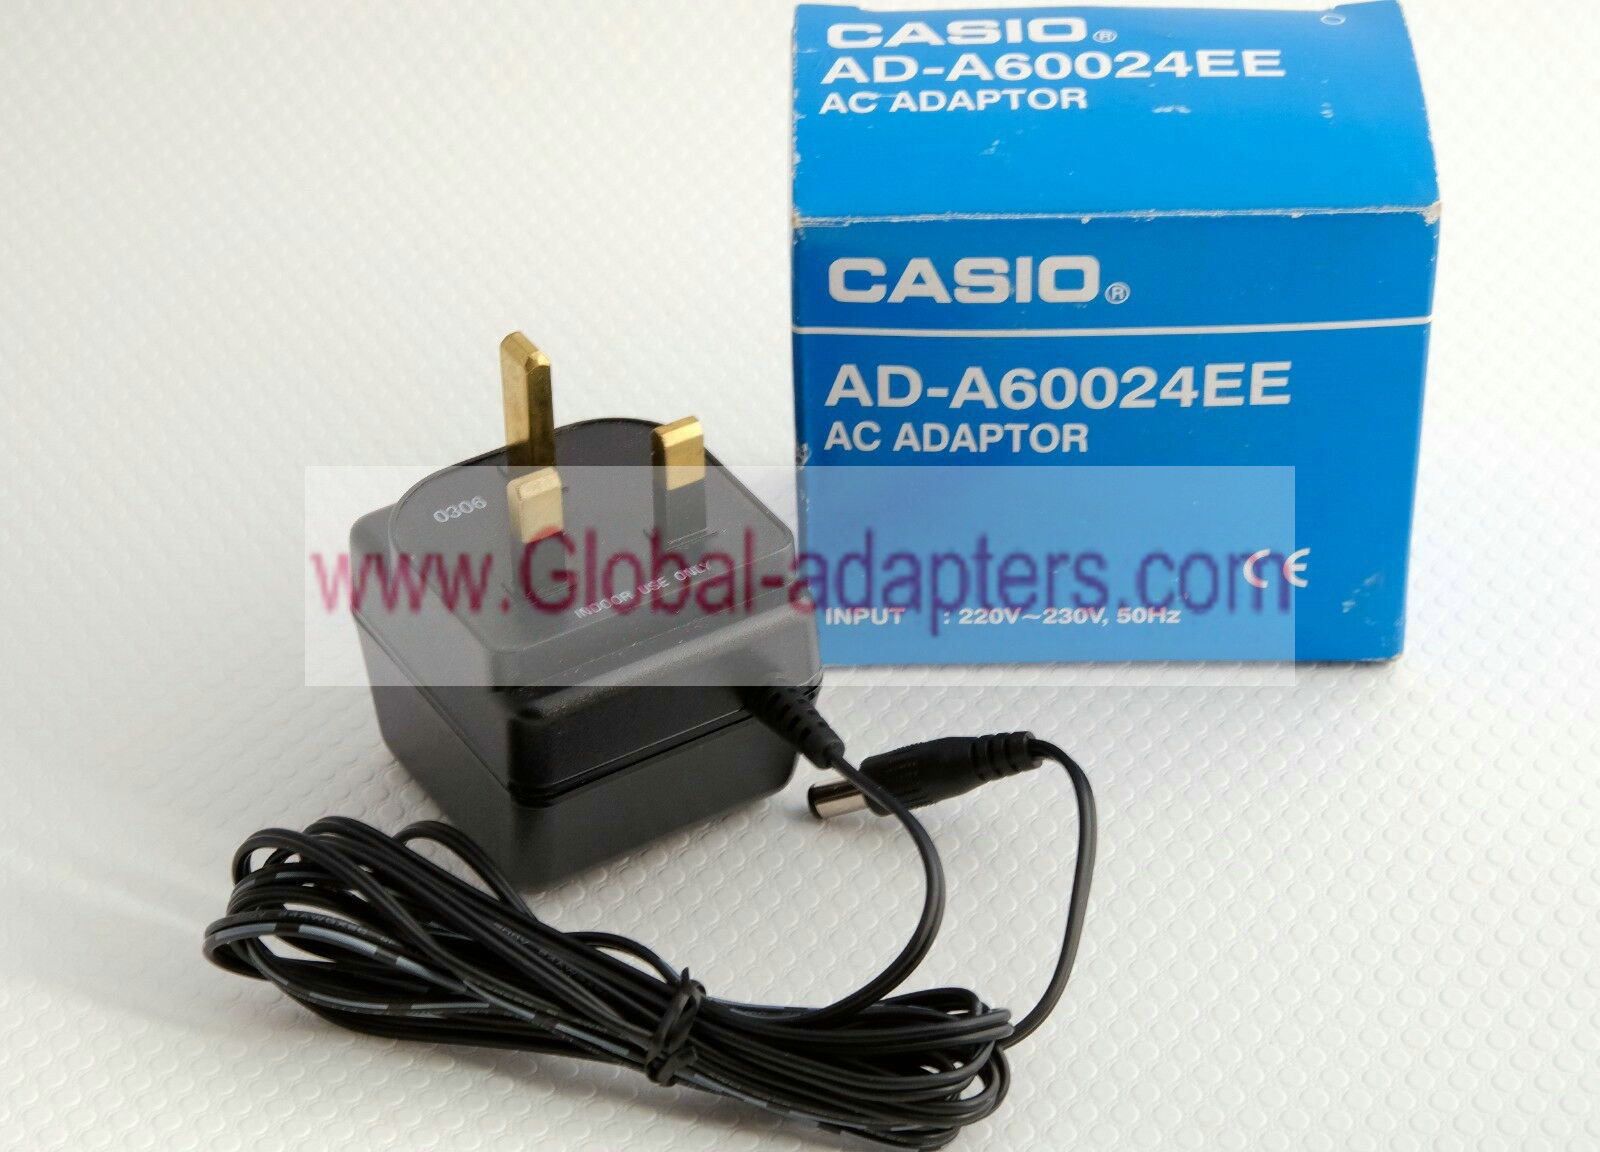 New Casio AD-A60024EE DC 6V 240mA AC Adapter Charger